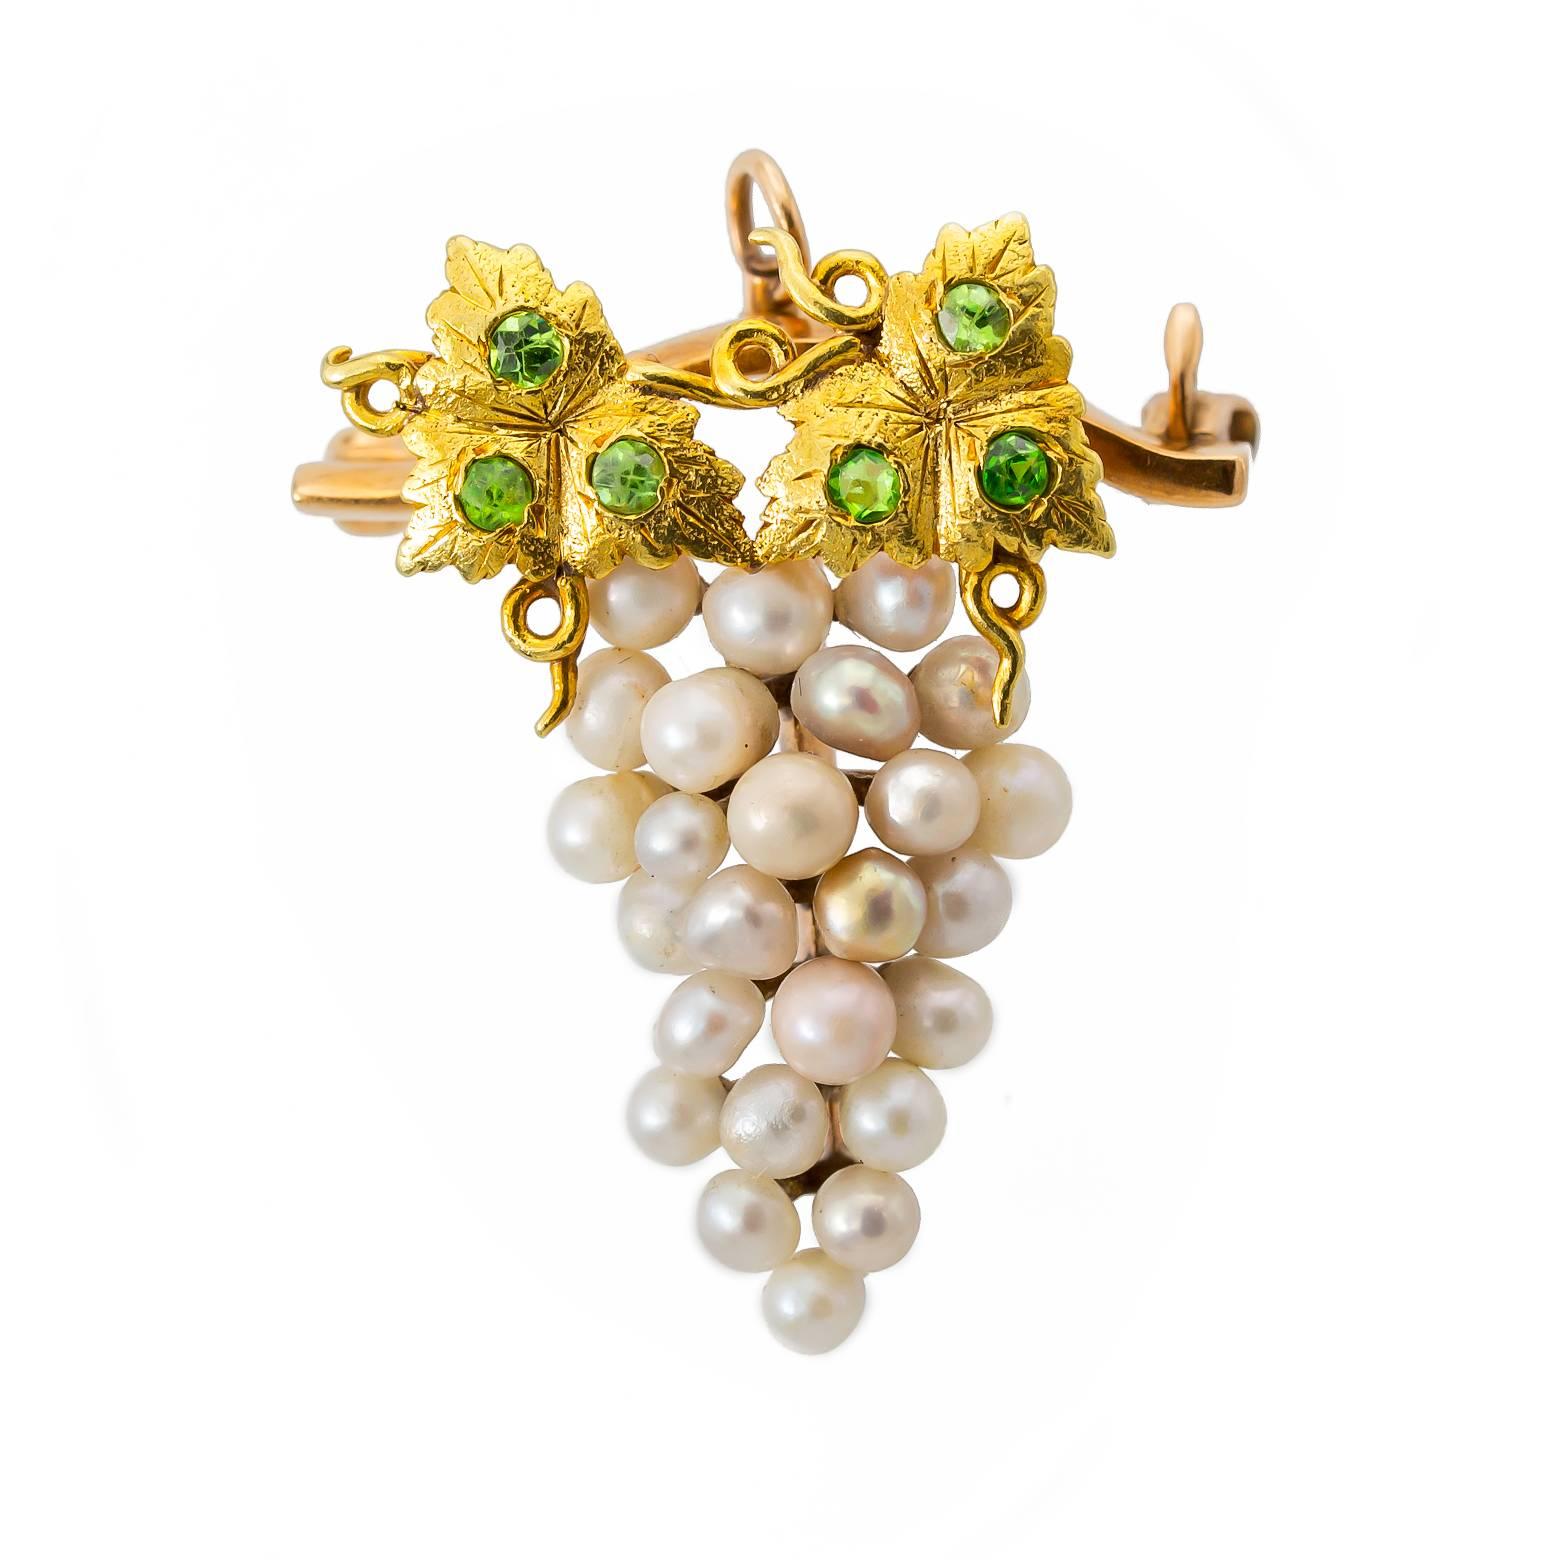 Art Nouveau Grape Pin Brooch in Gold with Demantoid Green Garnet and Fresh Water Pearls For Sale